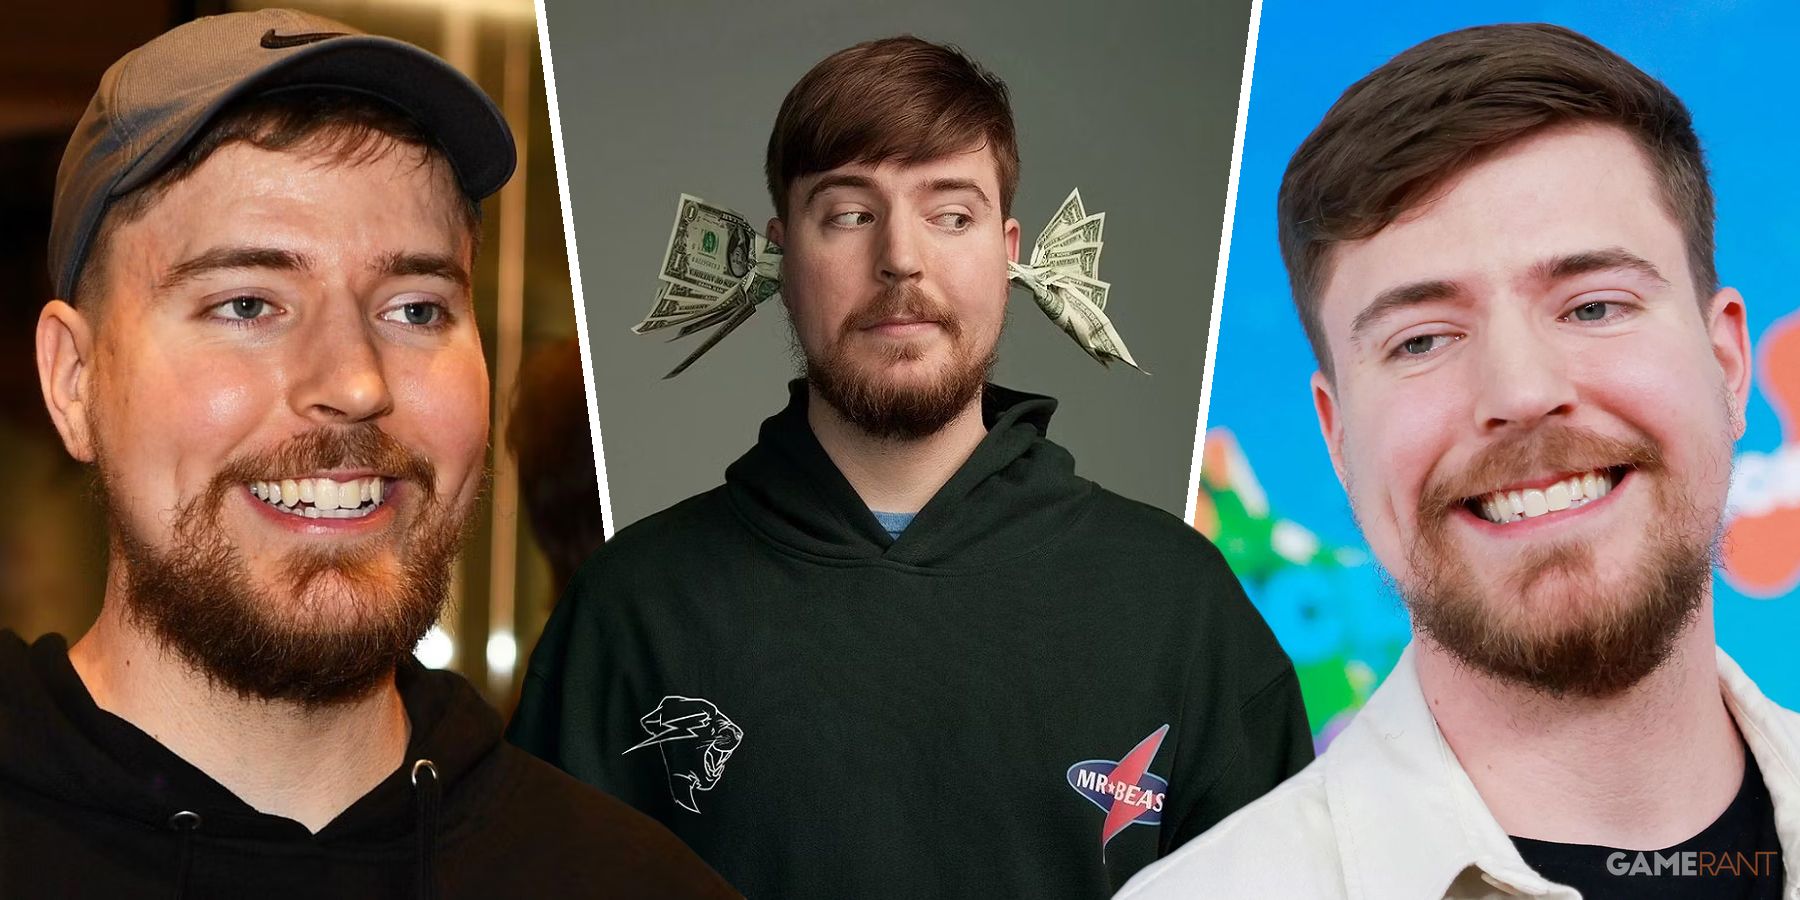 MrBeast Net Worth 2023, Real Name, Age, Subscriber Count